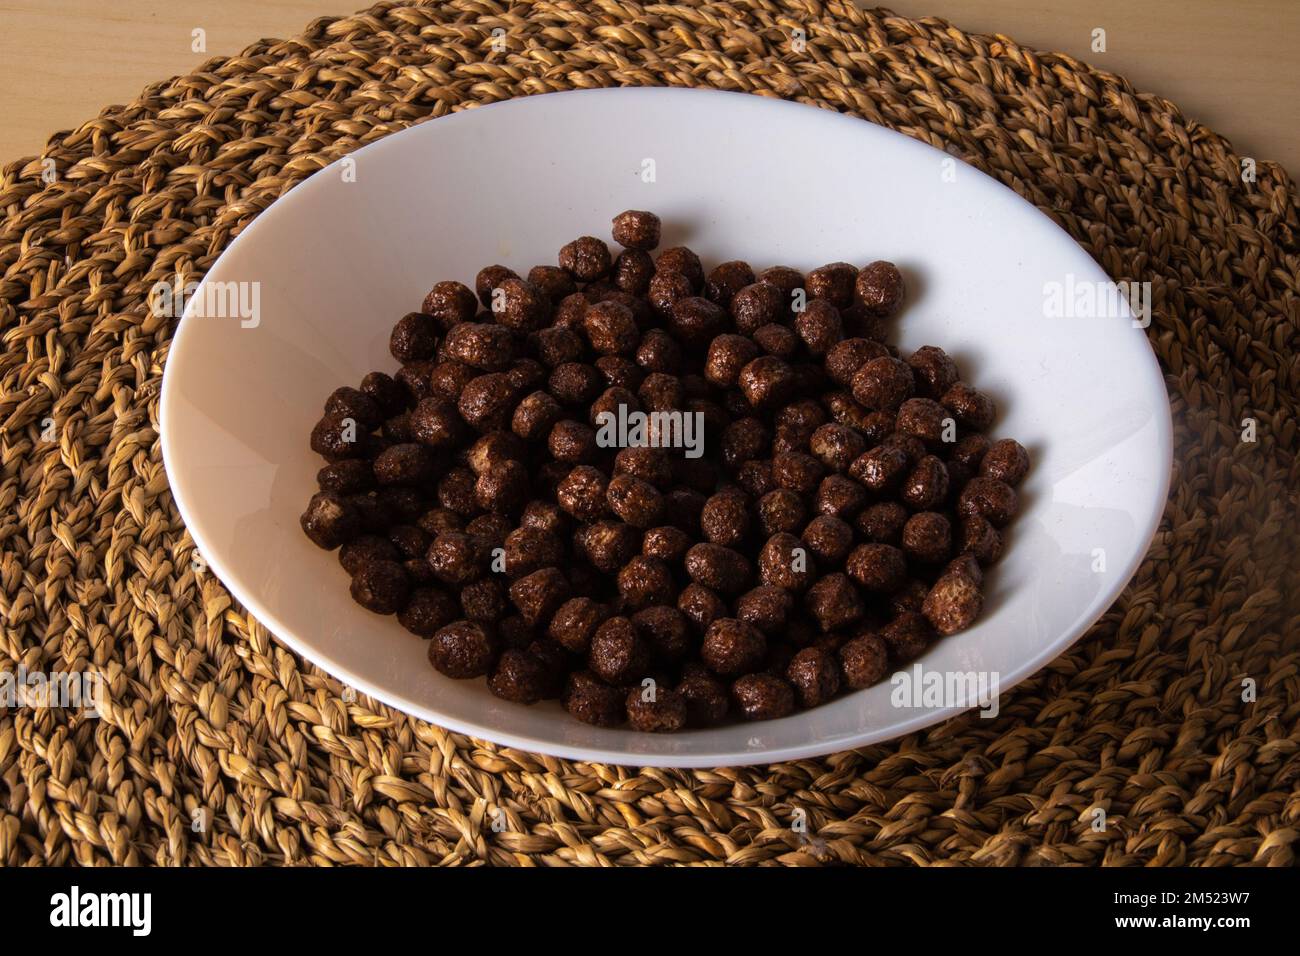 photo of dried chocolate cereal balls lying in a plate Stock Photo